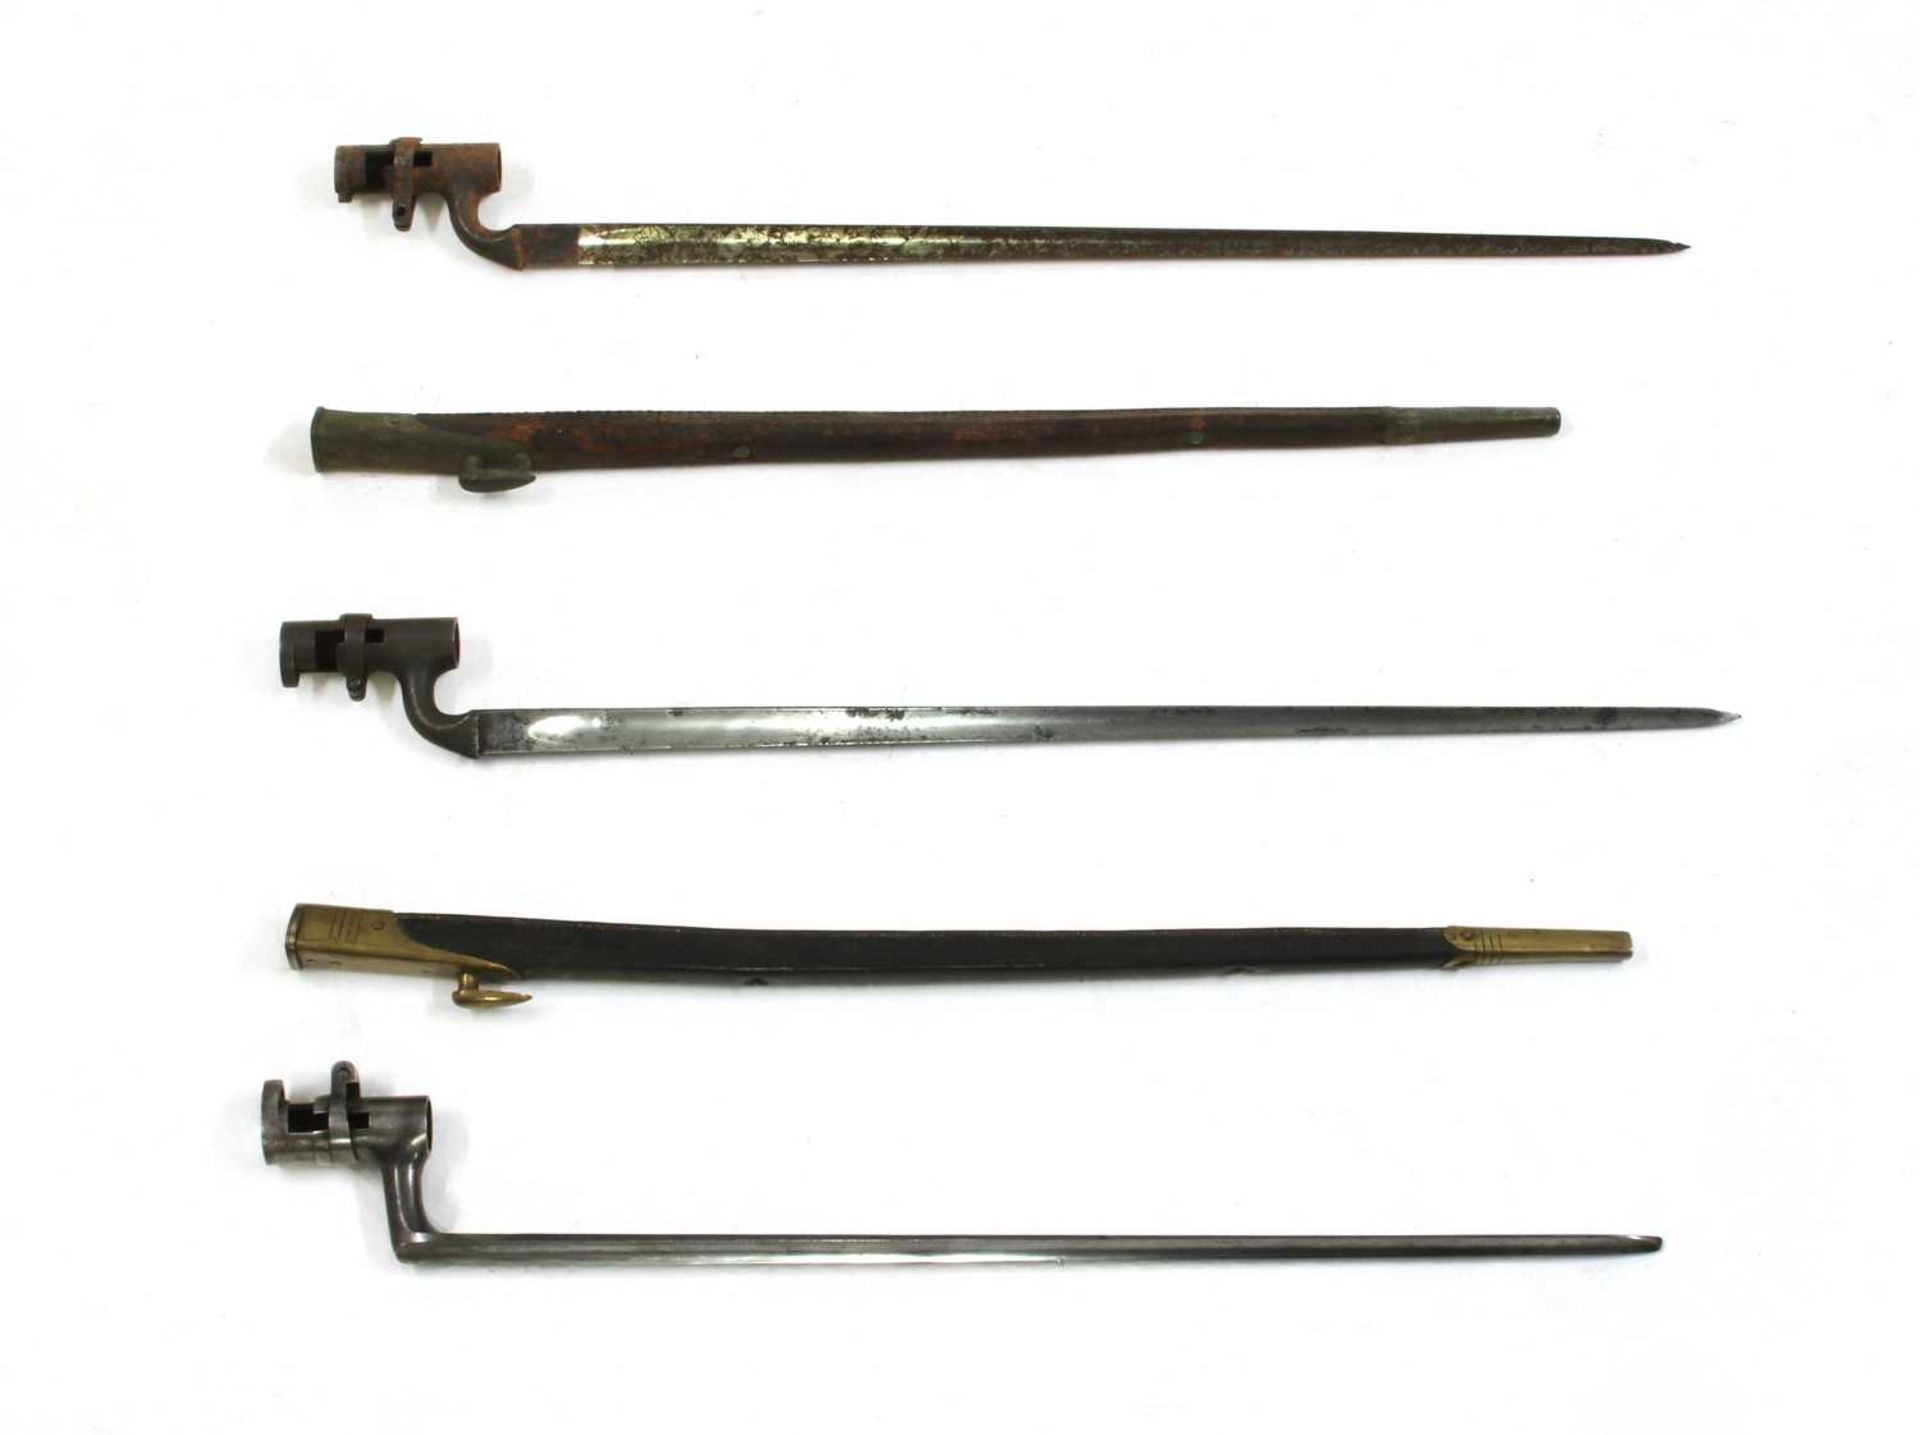 Two Martini Henry rifle bayonets with scabbards, - Image 3 of 4